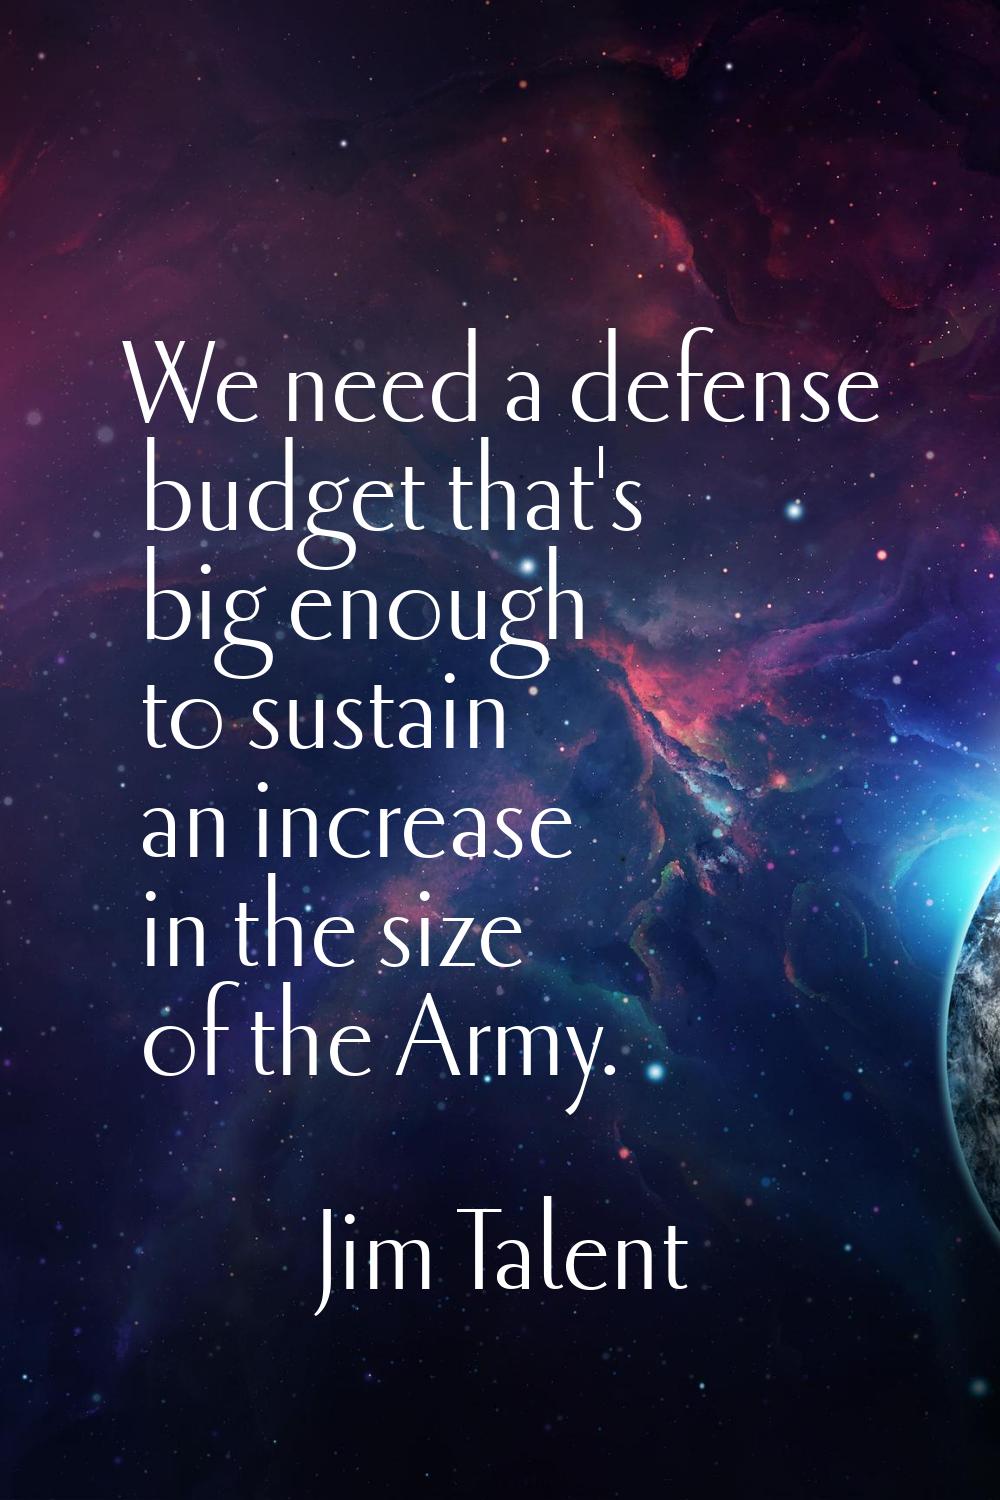 We need a defense budget that's big enough to sustain an increase in the size of the Army.